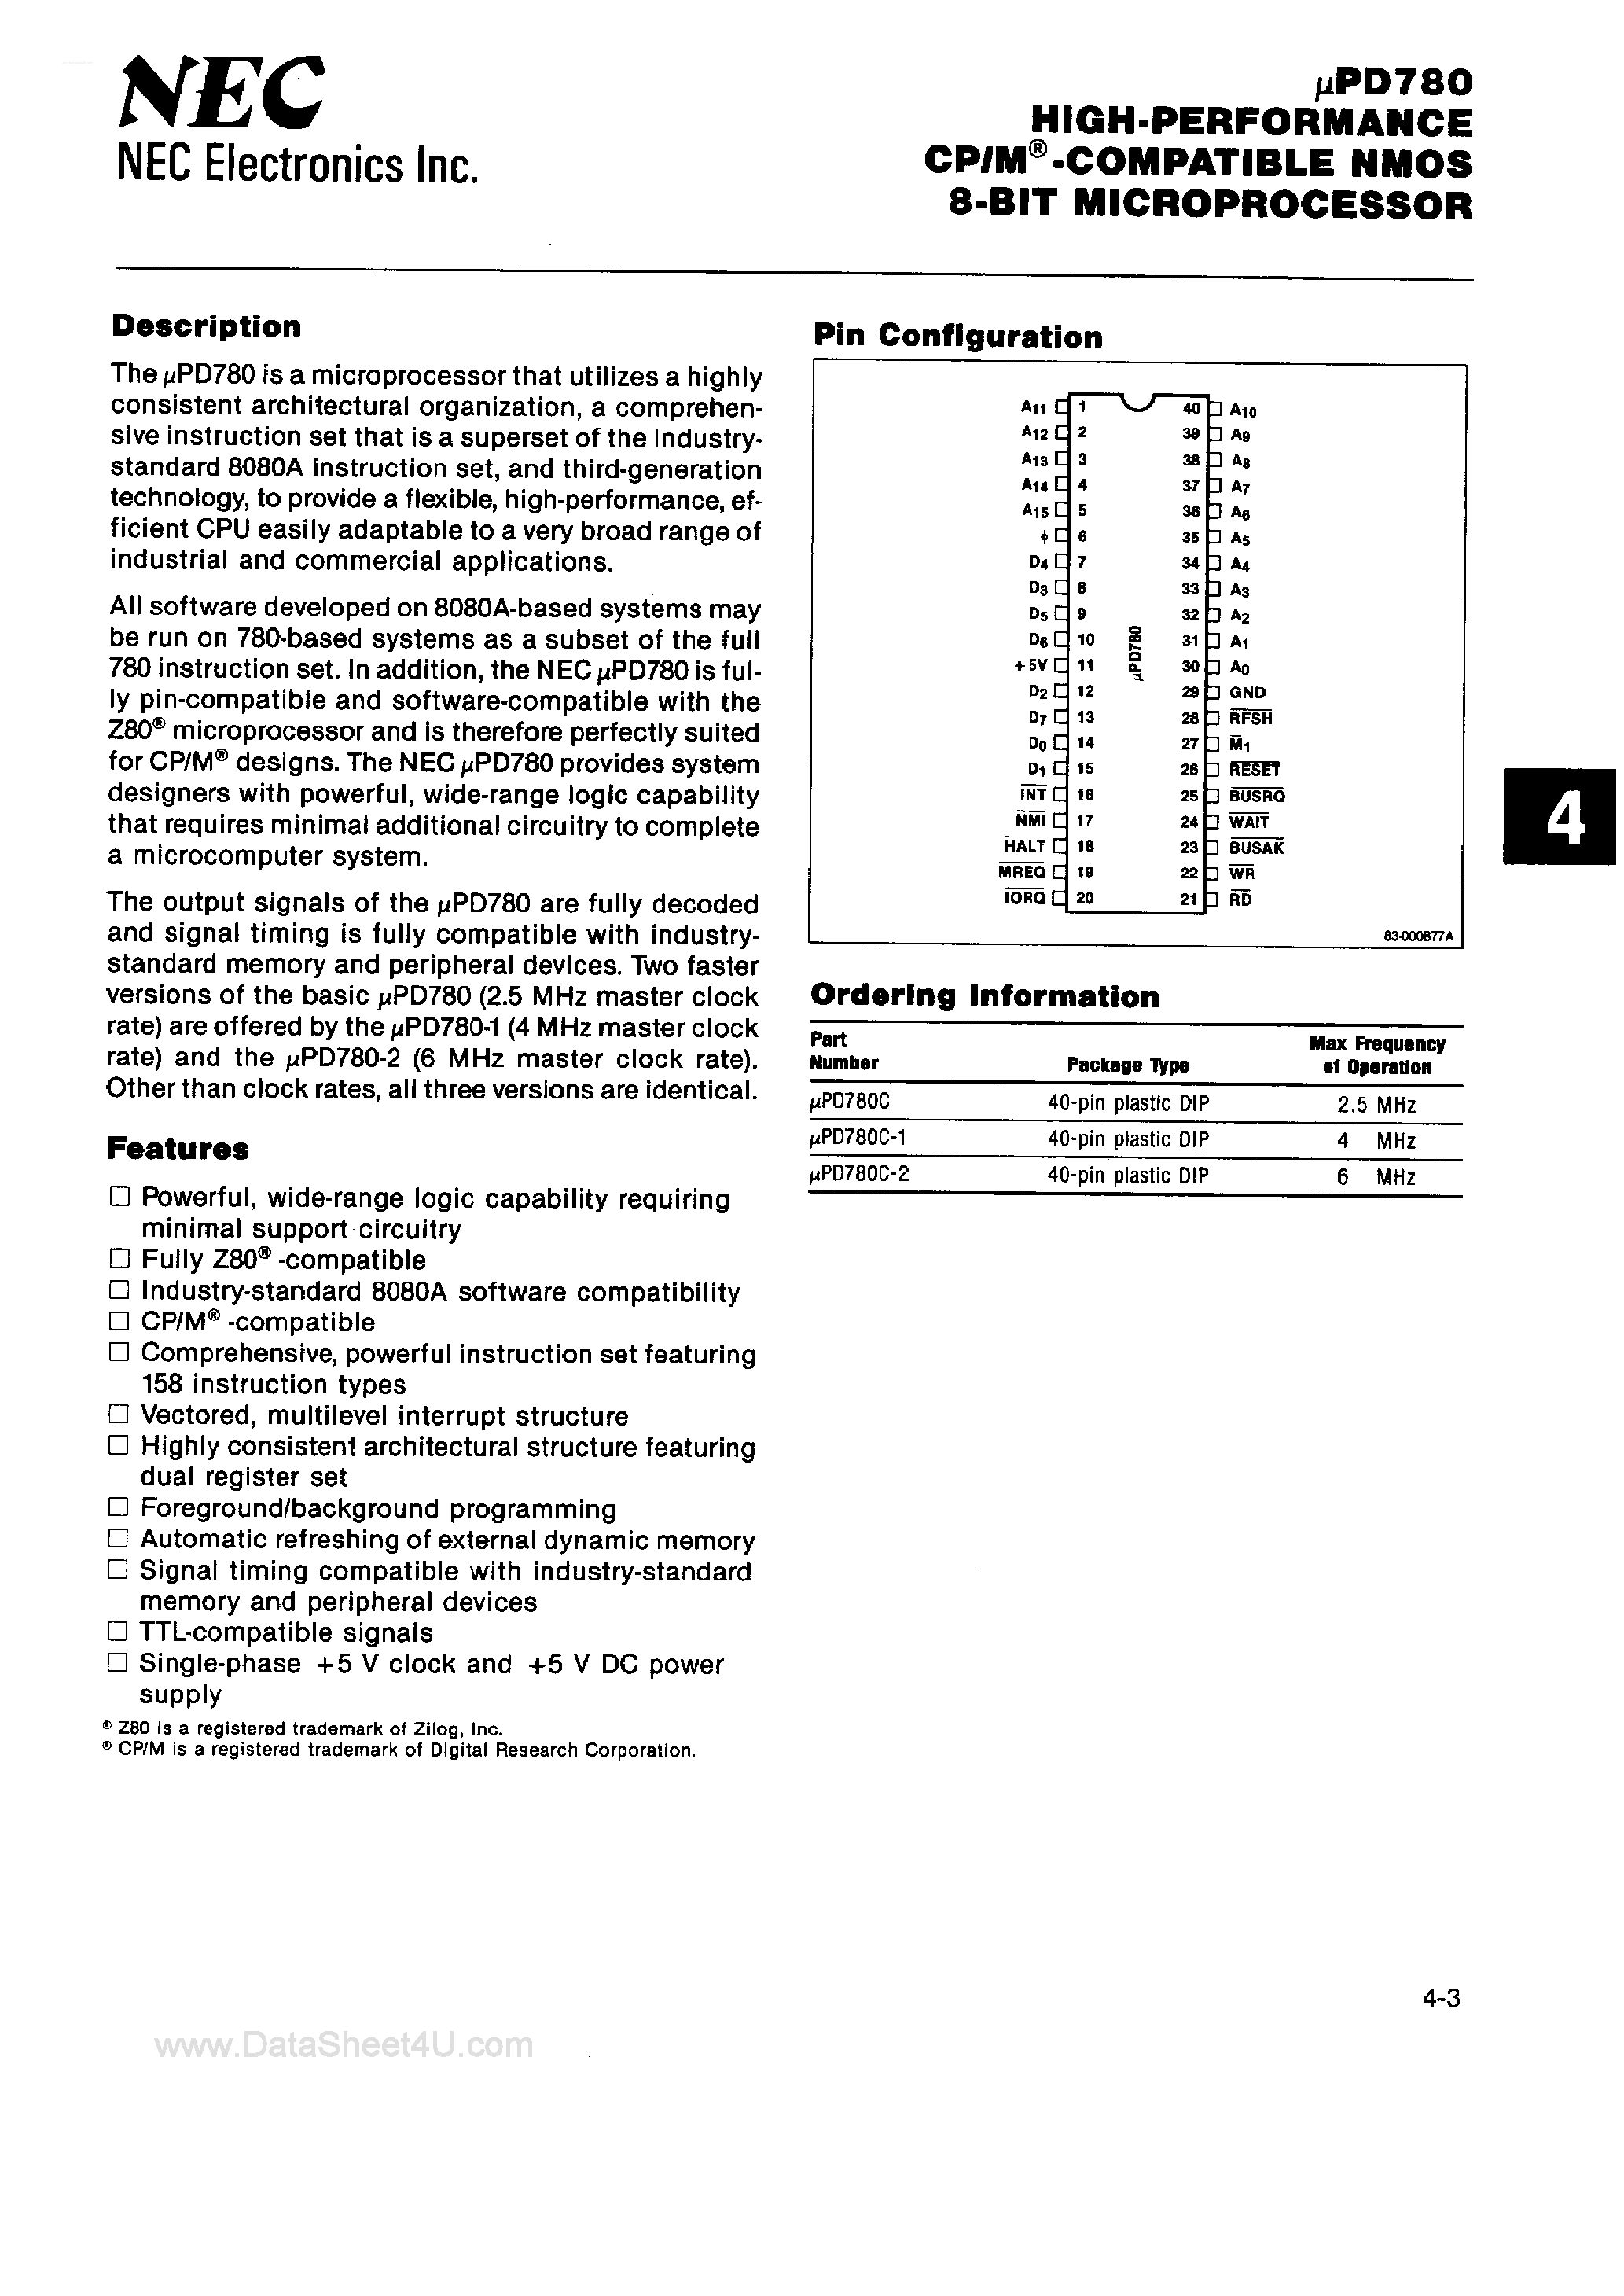 Datasheet UPD780C - High-Performance CP/M Compatible NMOS 8-Bit Microprocessor page 1